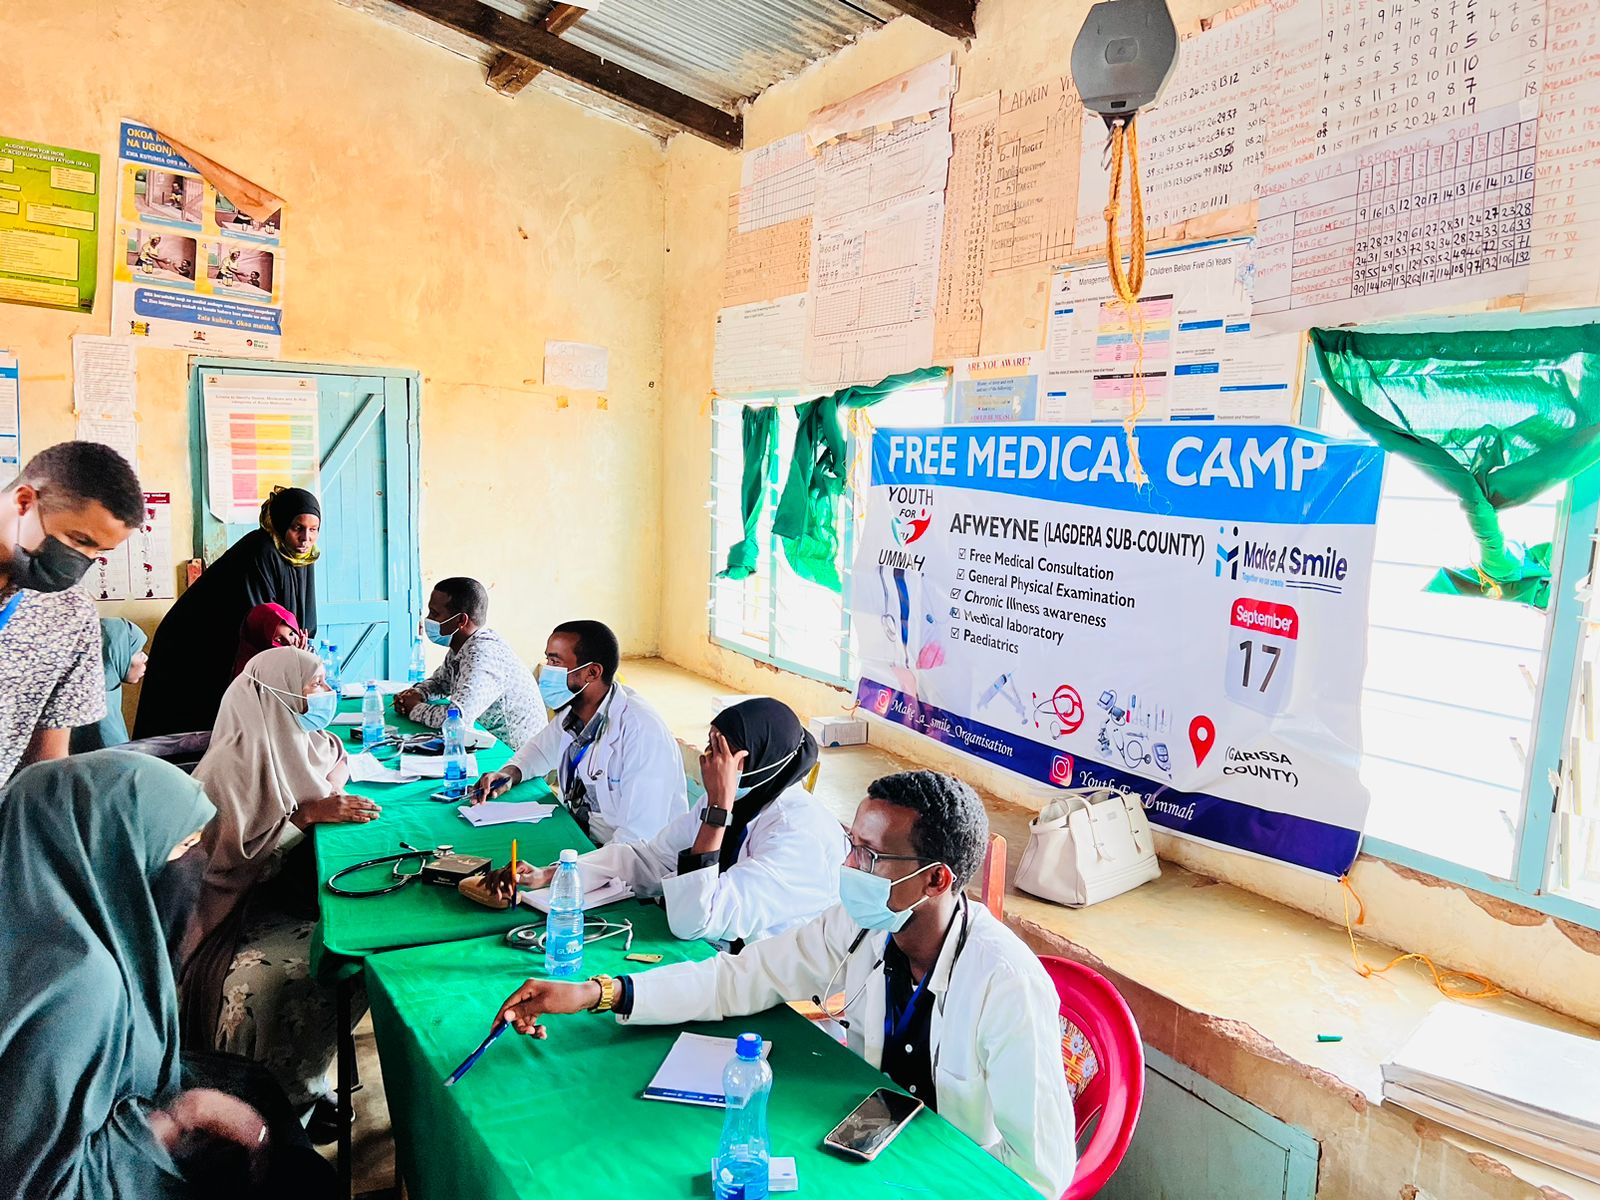 Young doctors from Garissa unite to fundraise and conduct free medical camps